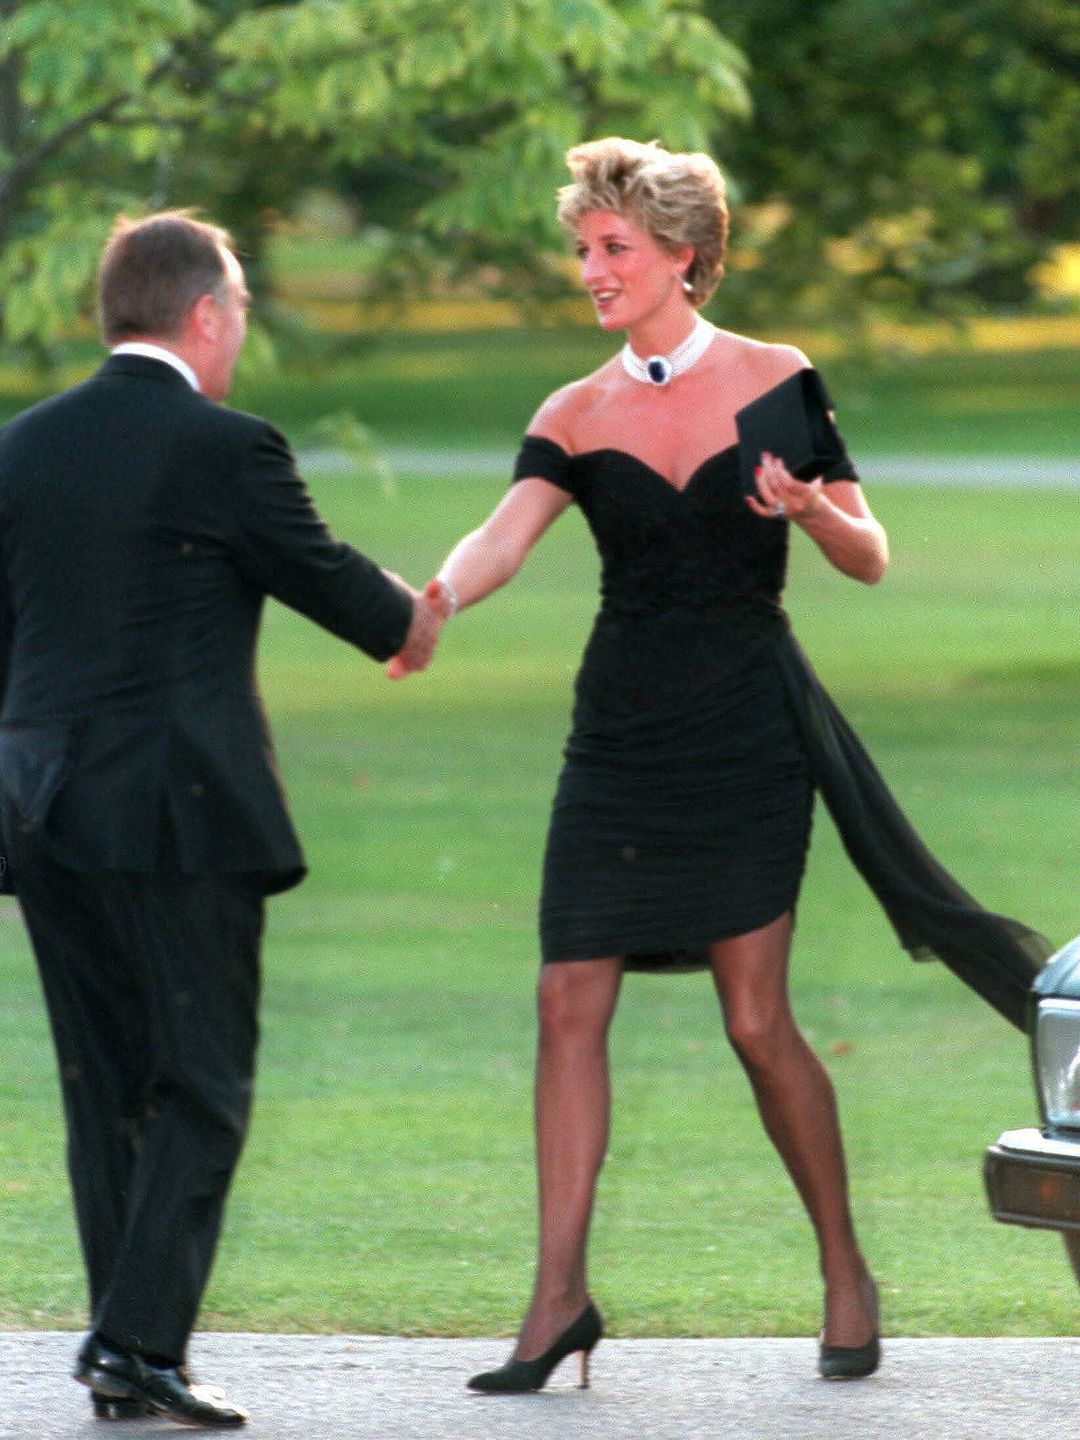 Diana, Princess of Wales, attends the Vanity Fair party at the Serpentine Gallery wearing the famous black "revenge dress" 